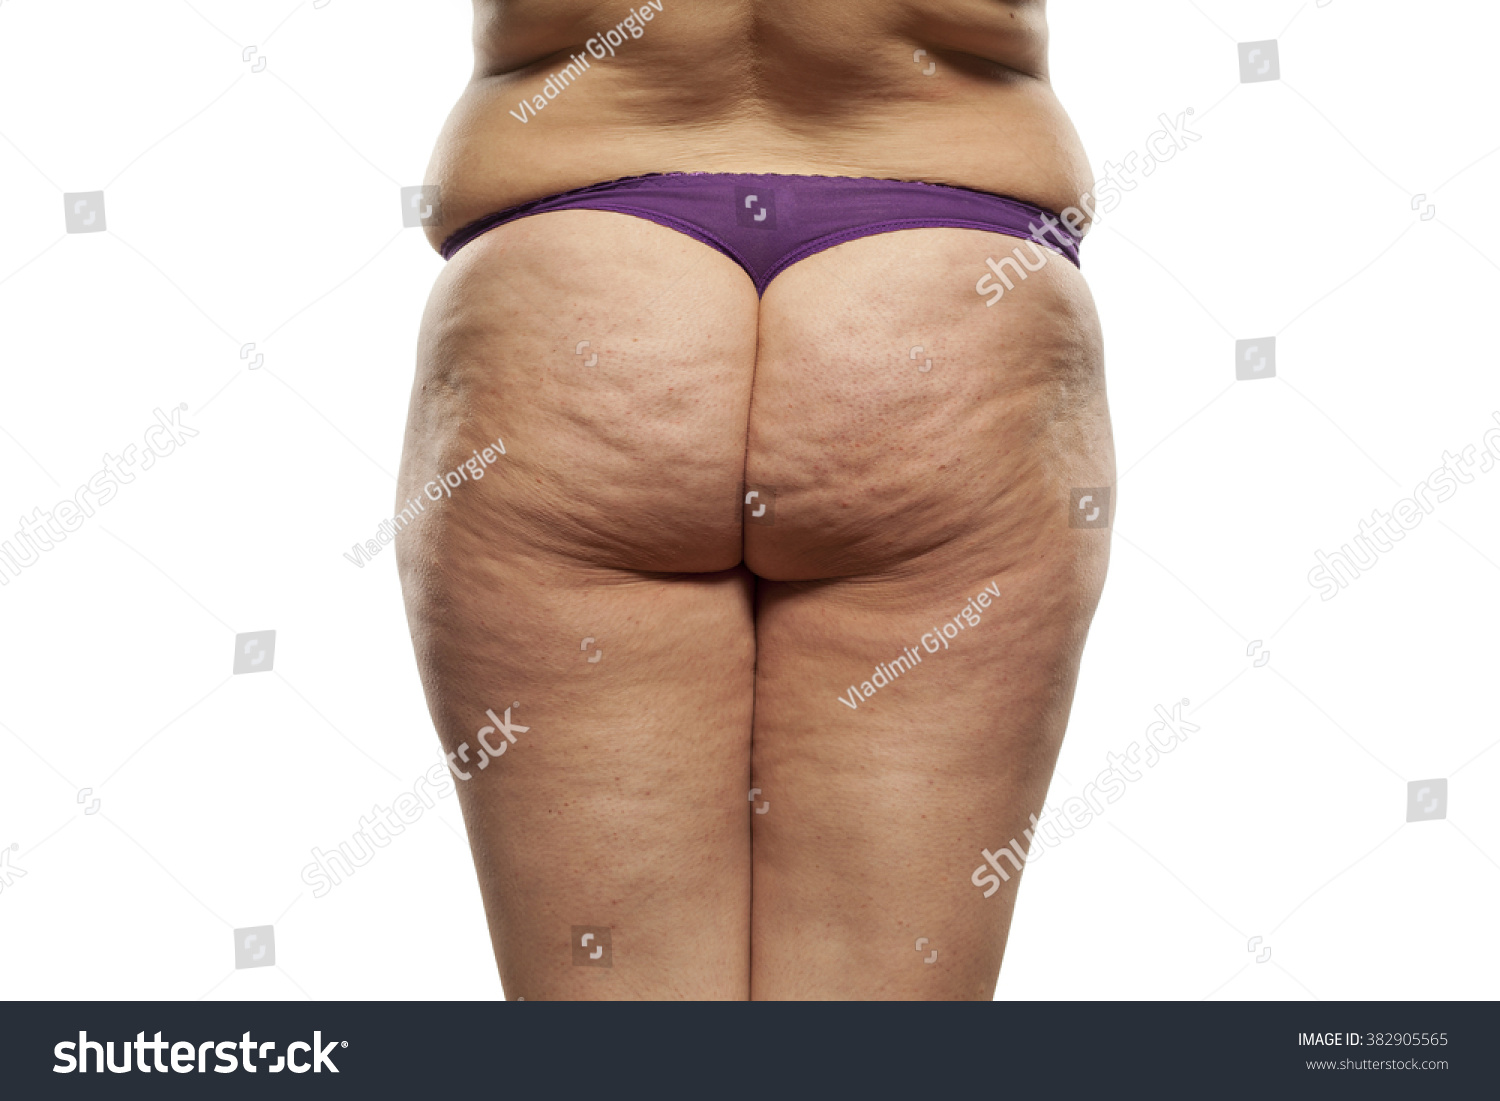 stock-photo-obese-female-buttocks-with-cellulite-and-stretch-marks-382905565.jpg